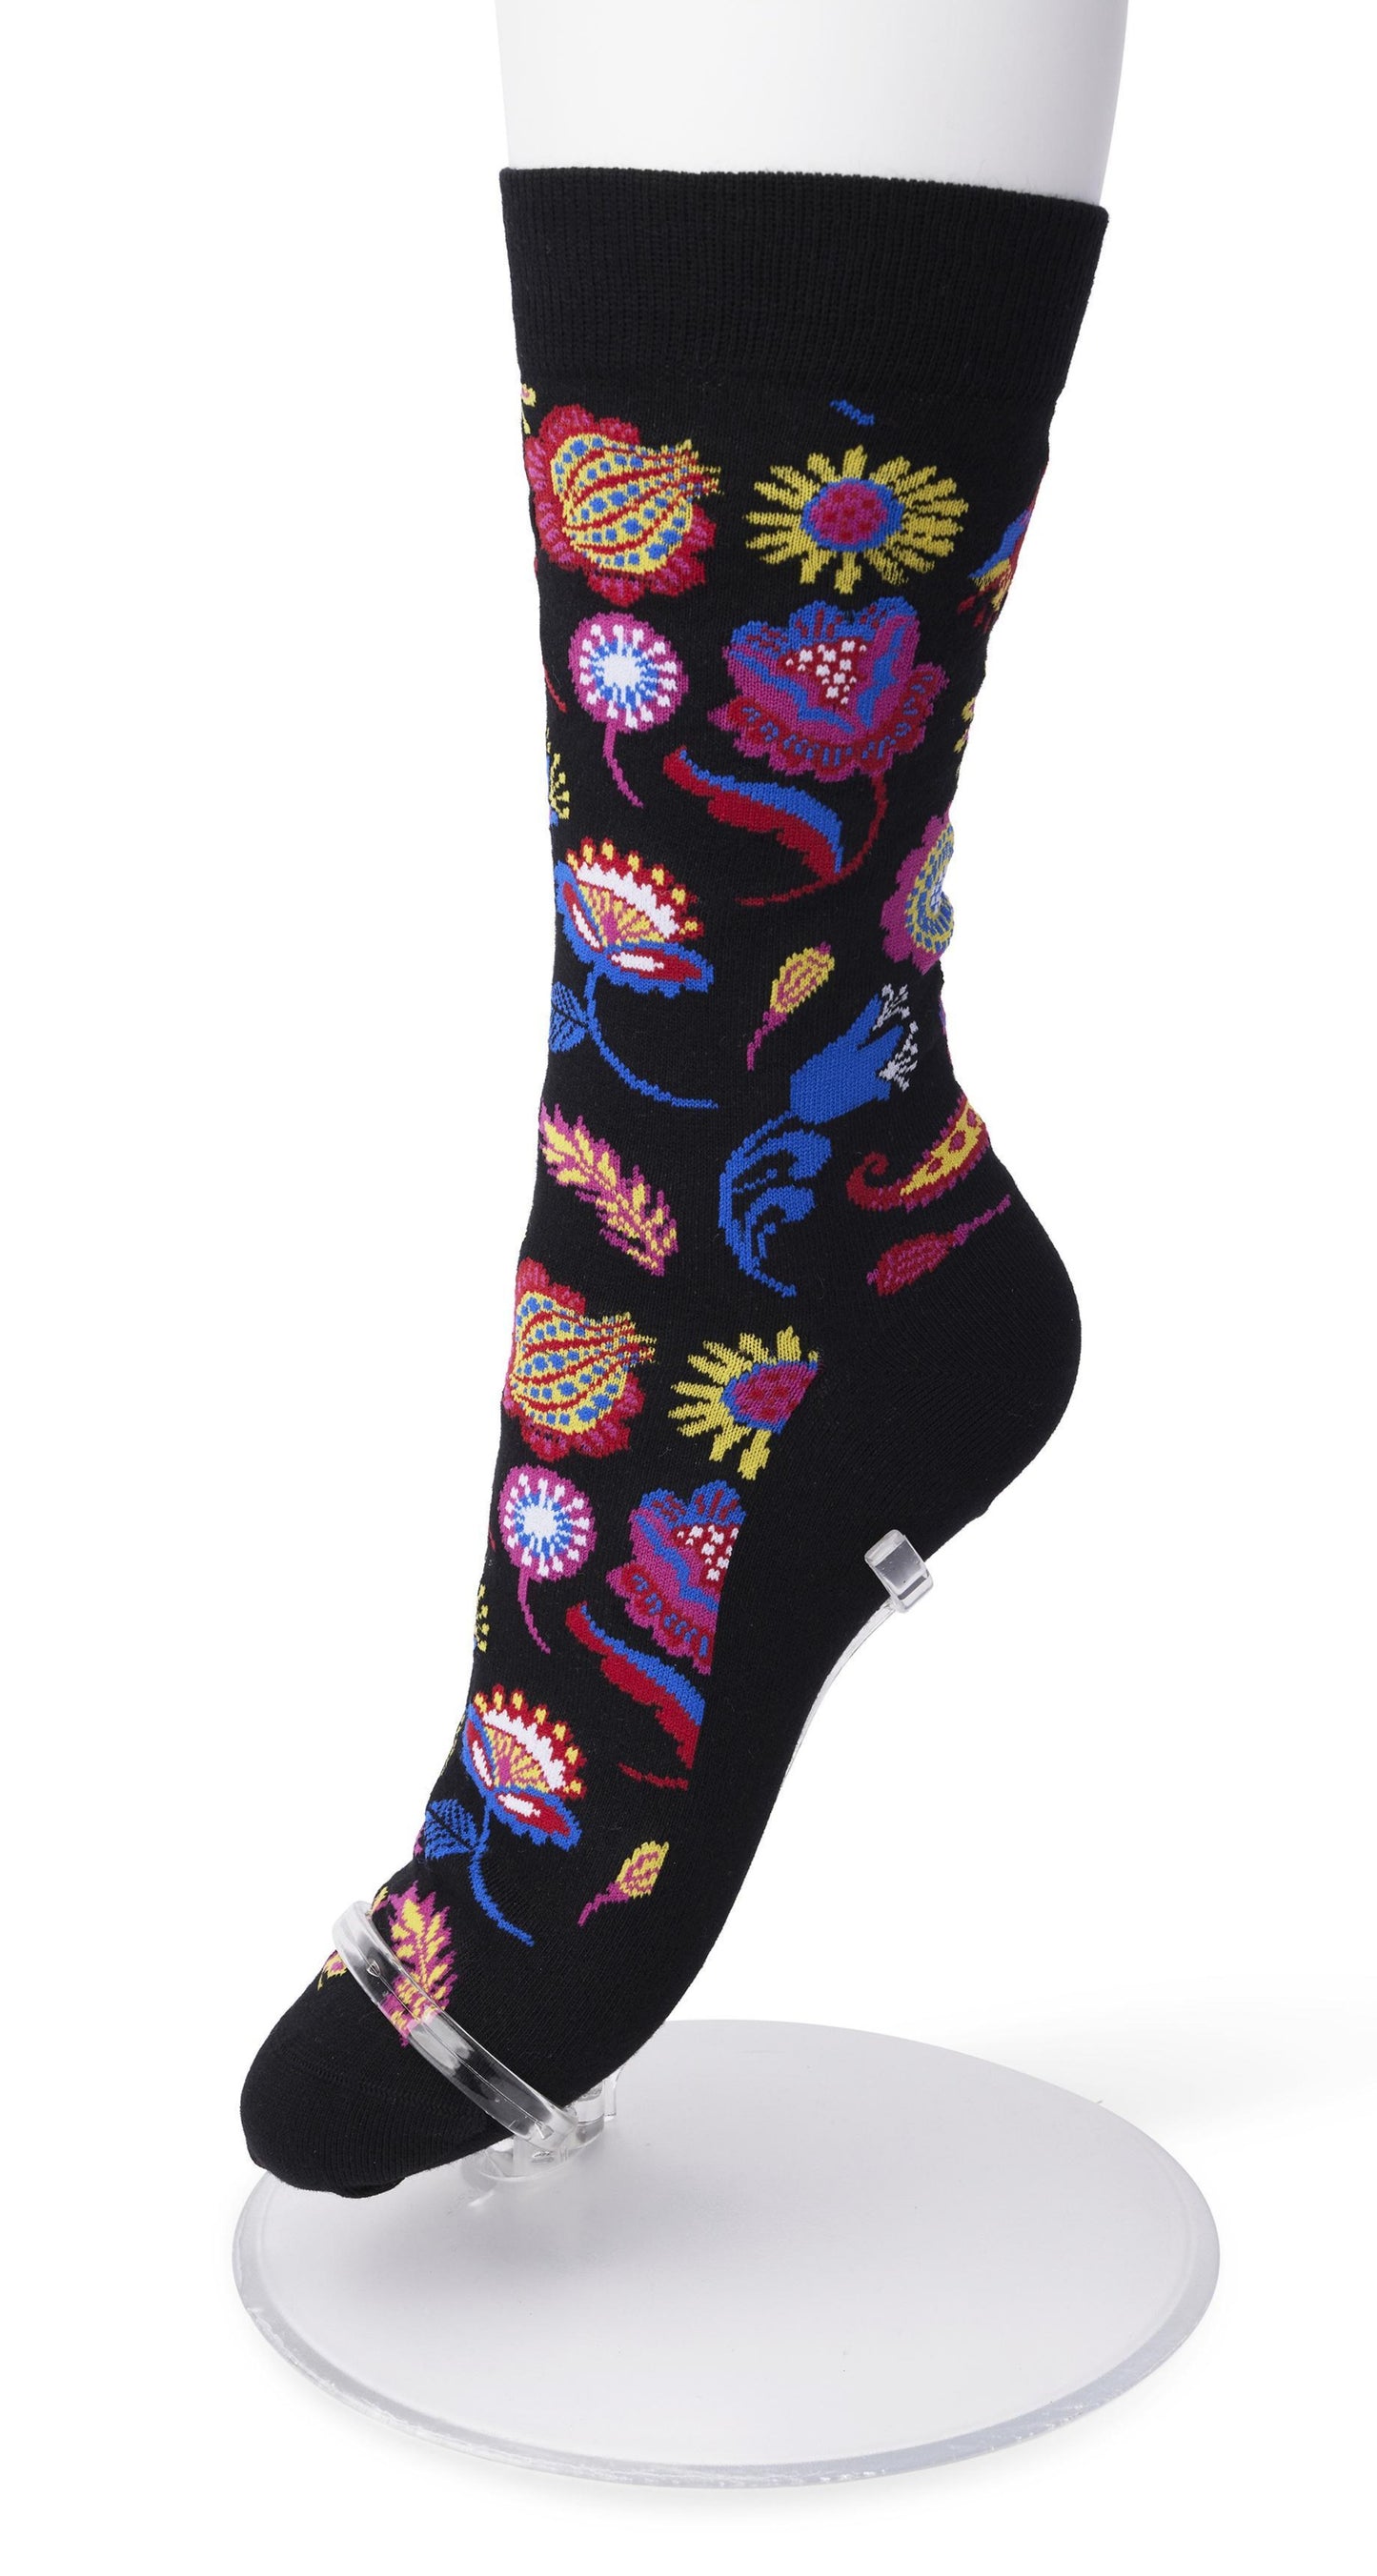 Bonnie Doon BP211121 Flower Fantasy Sock - Black cotton ankle socks with a woven multicoloured floral pattern.